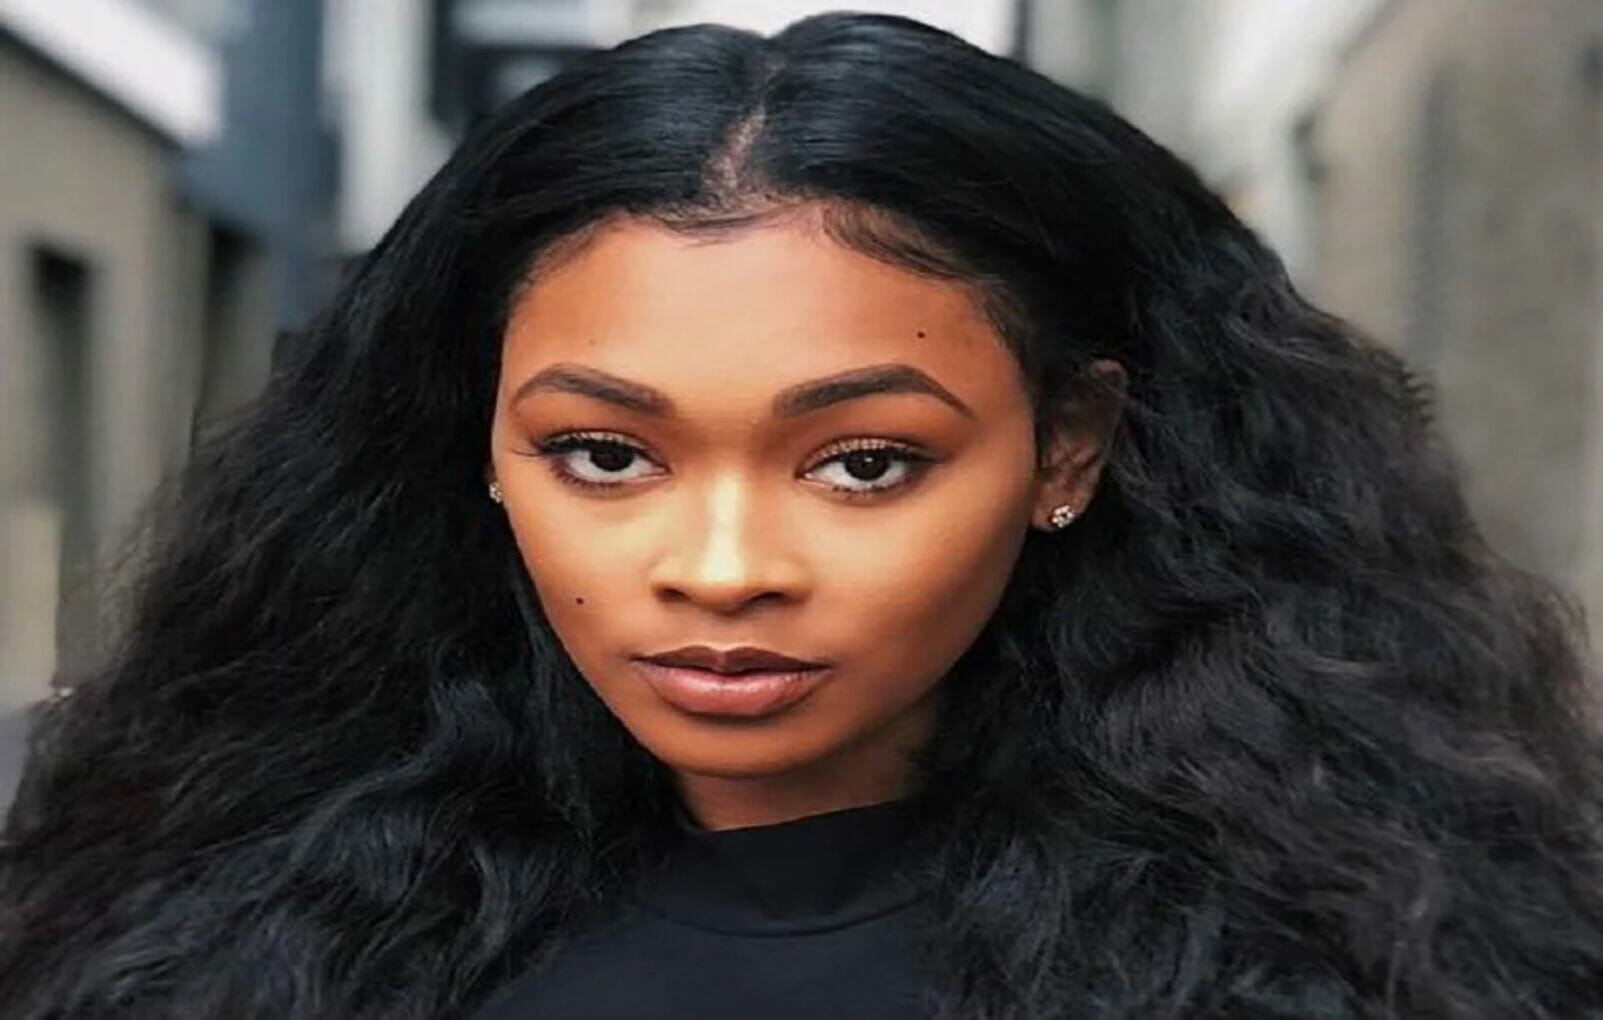 Miracle Watts Blonde Hair: 10 Stunning Photos of the Model's Iconic Look - wide 4